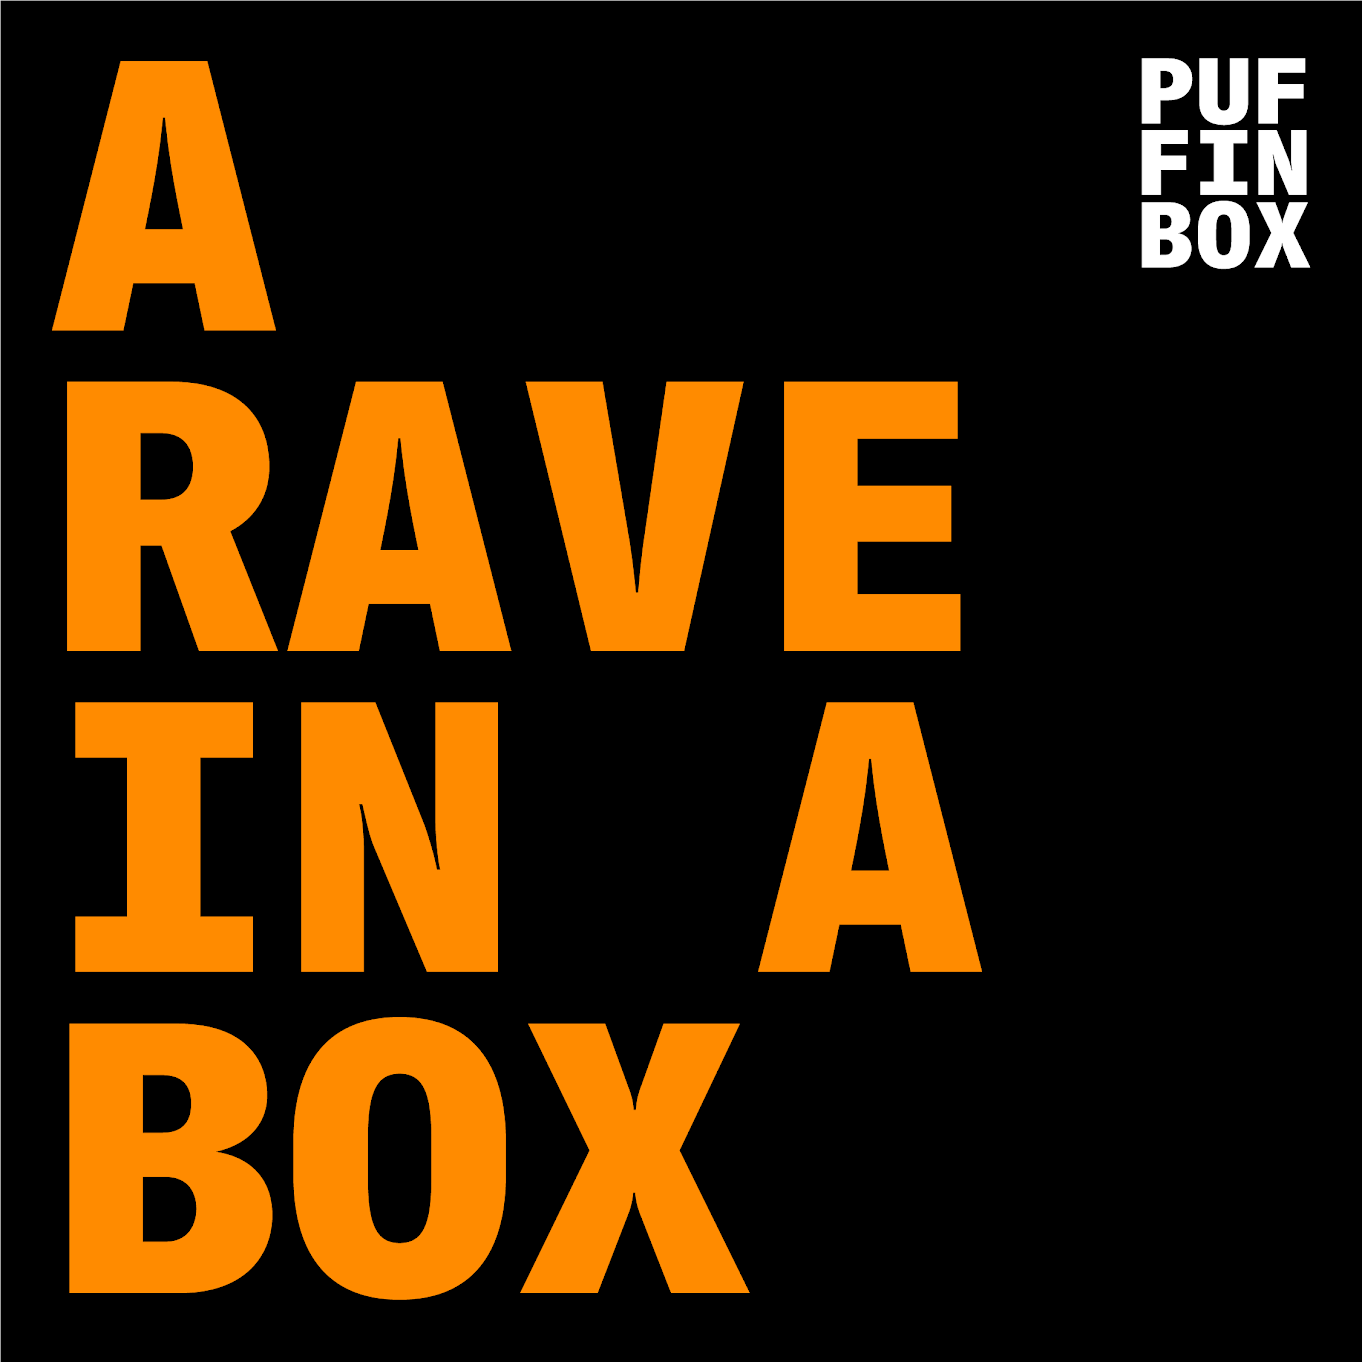 You can &#8216;rave in a box&#8217; with your social bubble at this new event coming to Manchester, The Manc